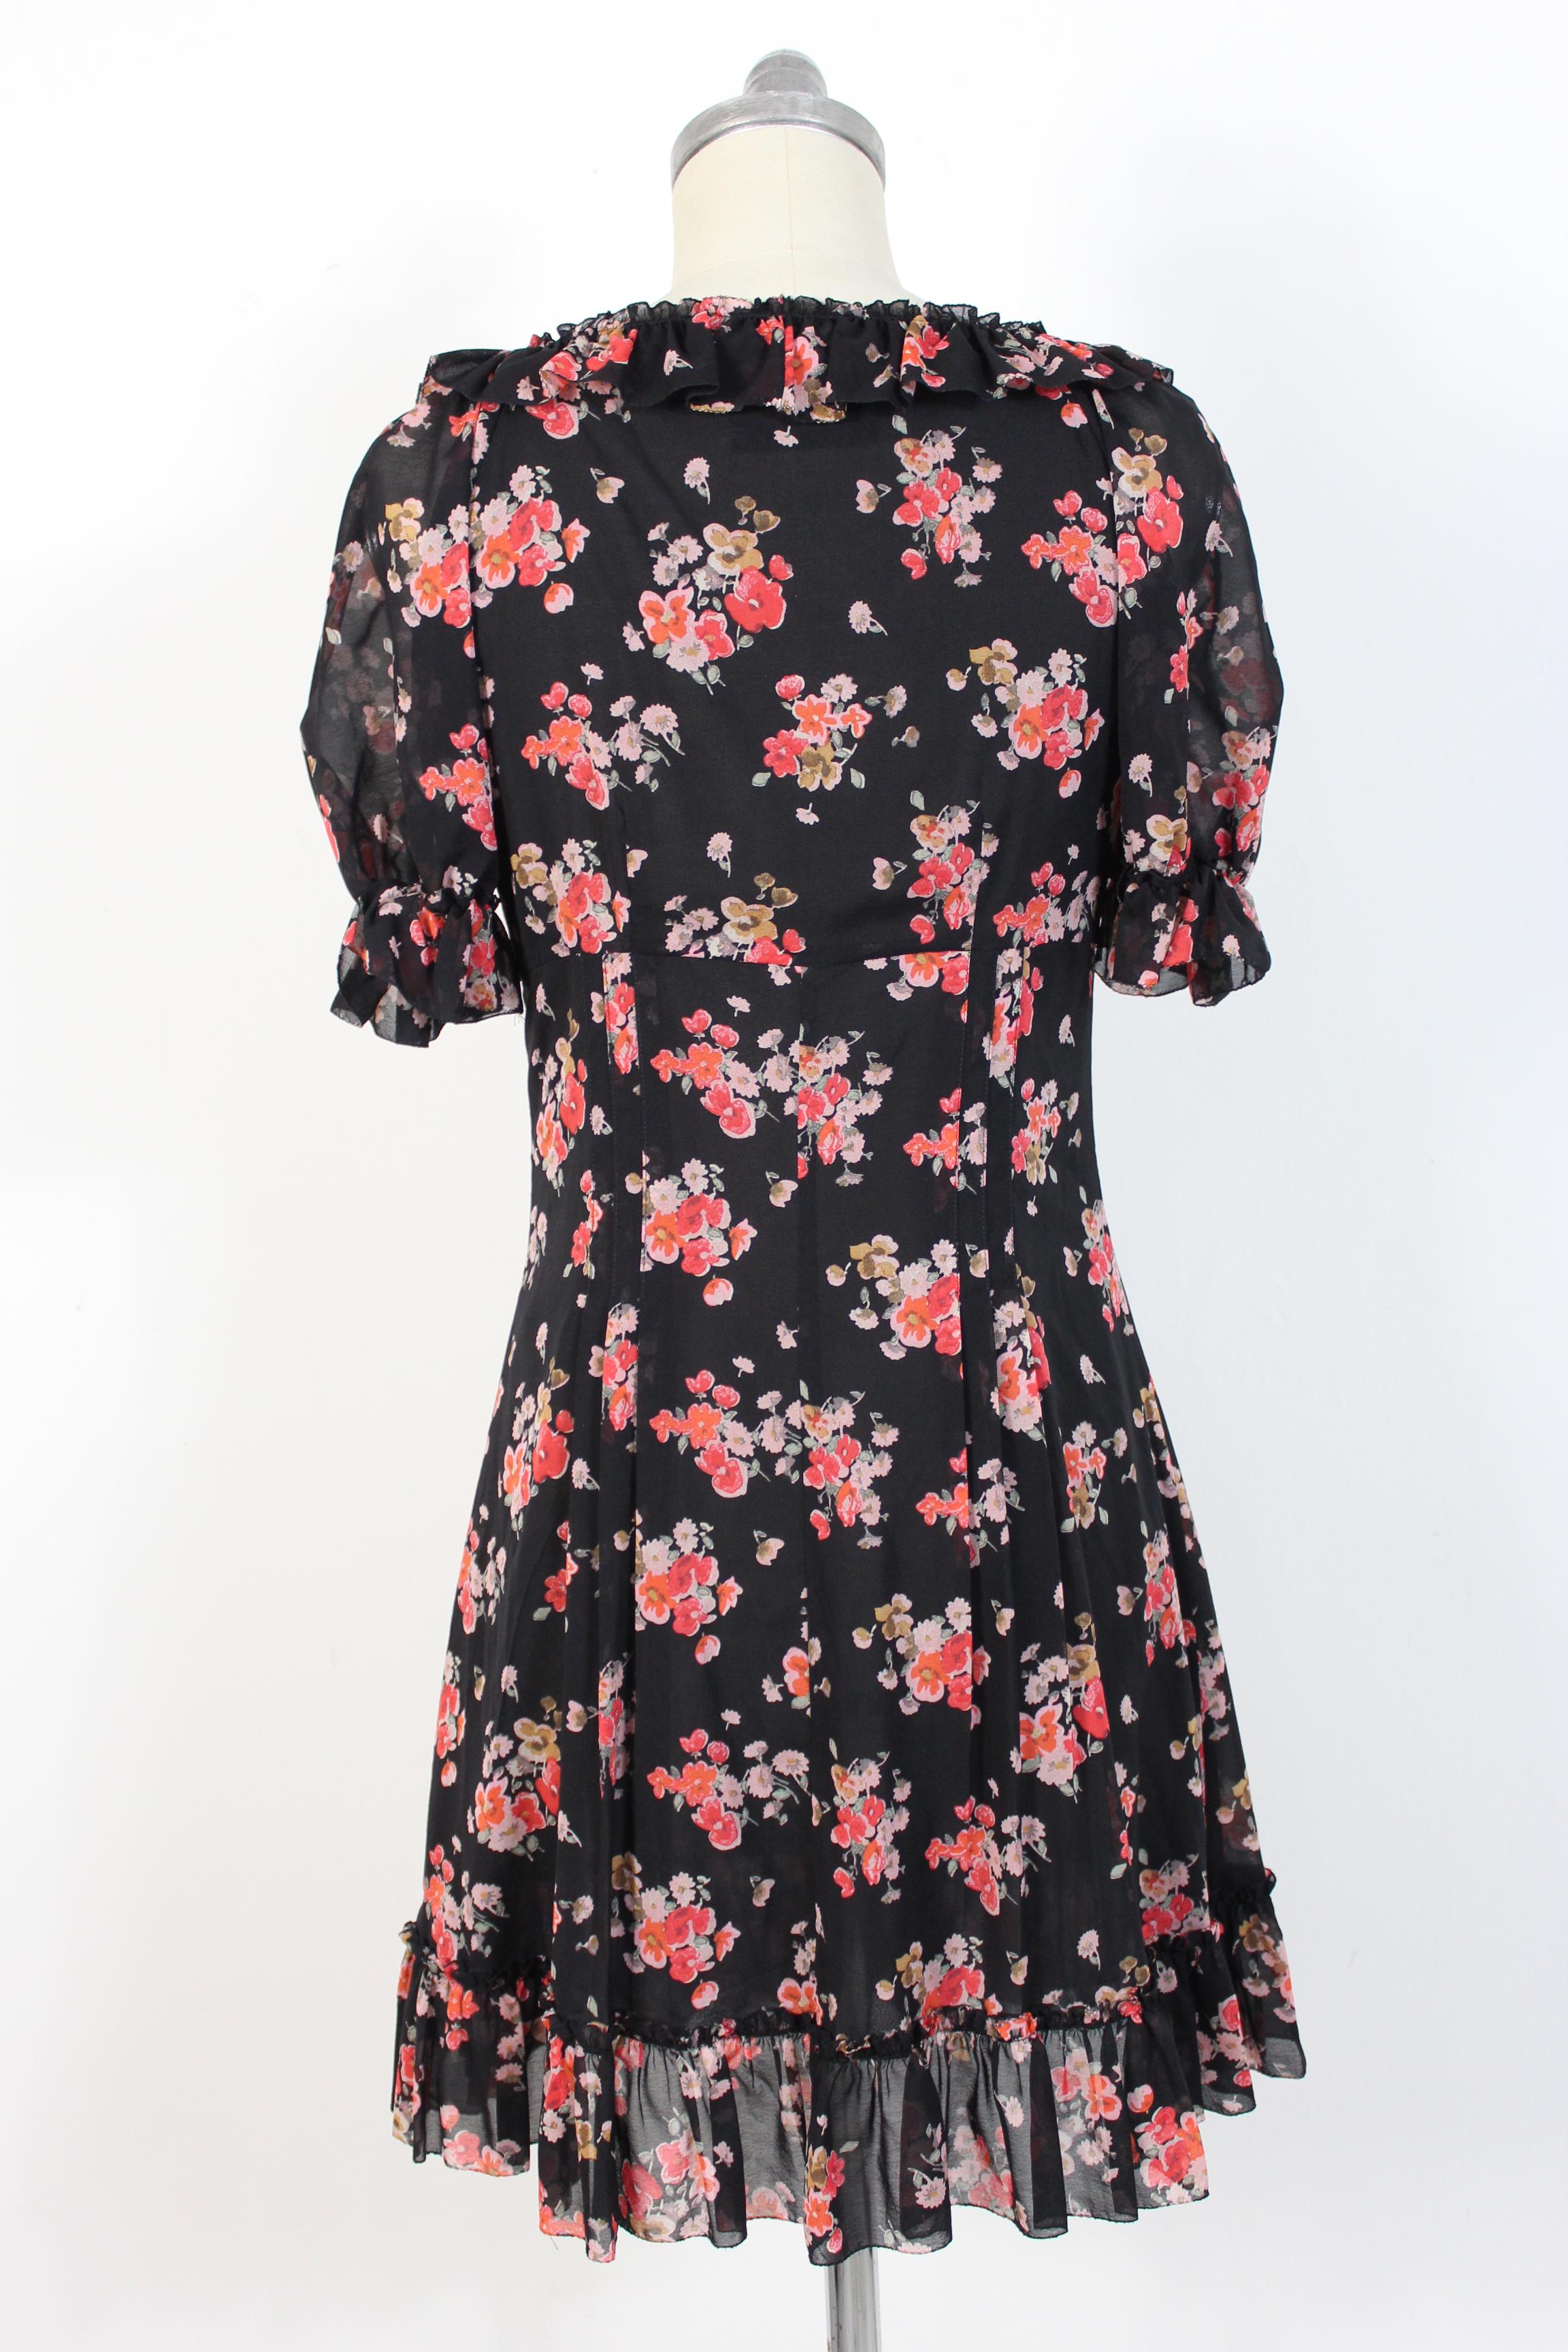 Dolce & Gabbana 90s vintage dress. Short dress, soft model, with ruffles on the lengths. Black color with pink floral designs. 92% silk 8% polyamide. Button closure. Internally lined 100% silk. Made in Italy. Excellent vintage condition.

Size: 44